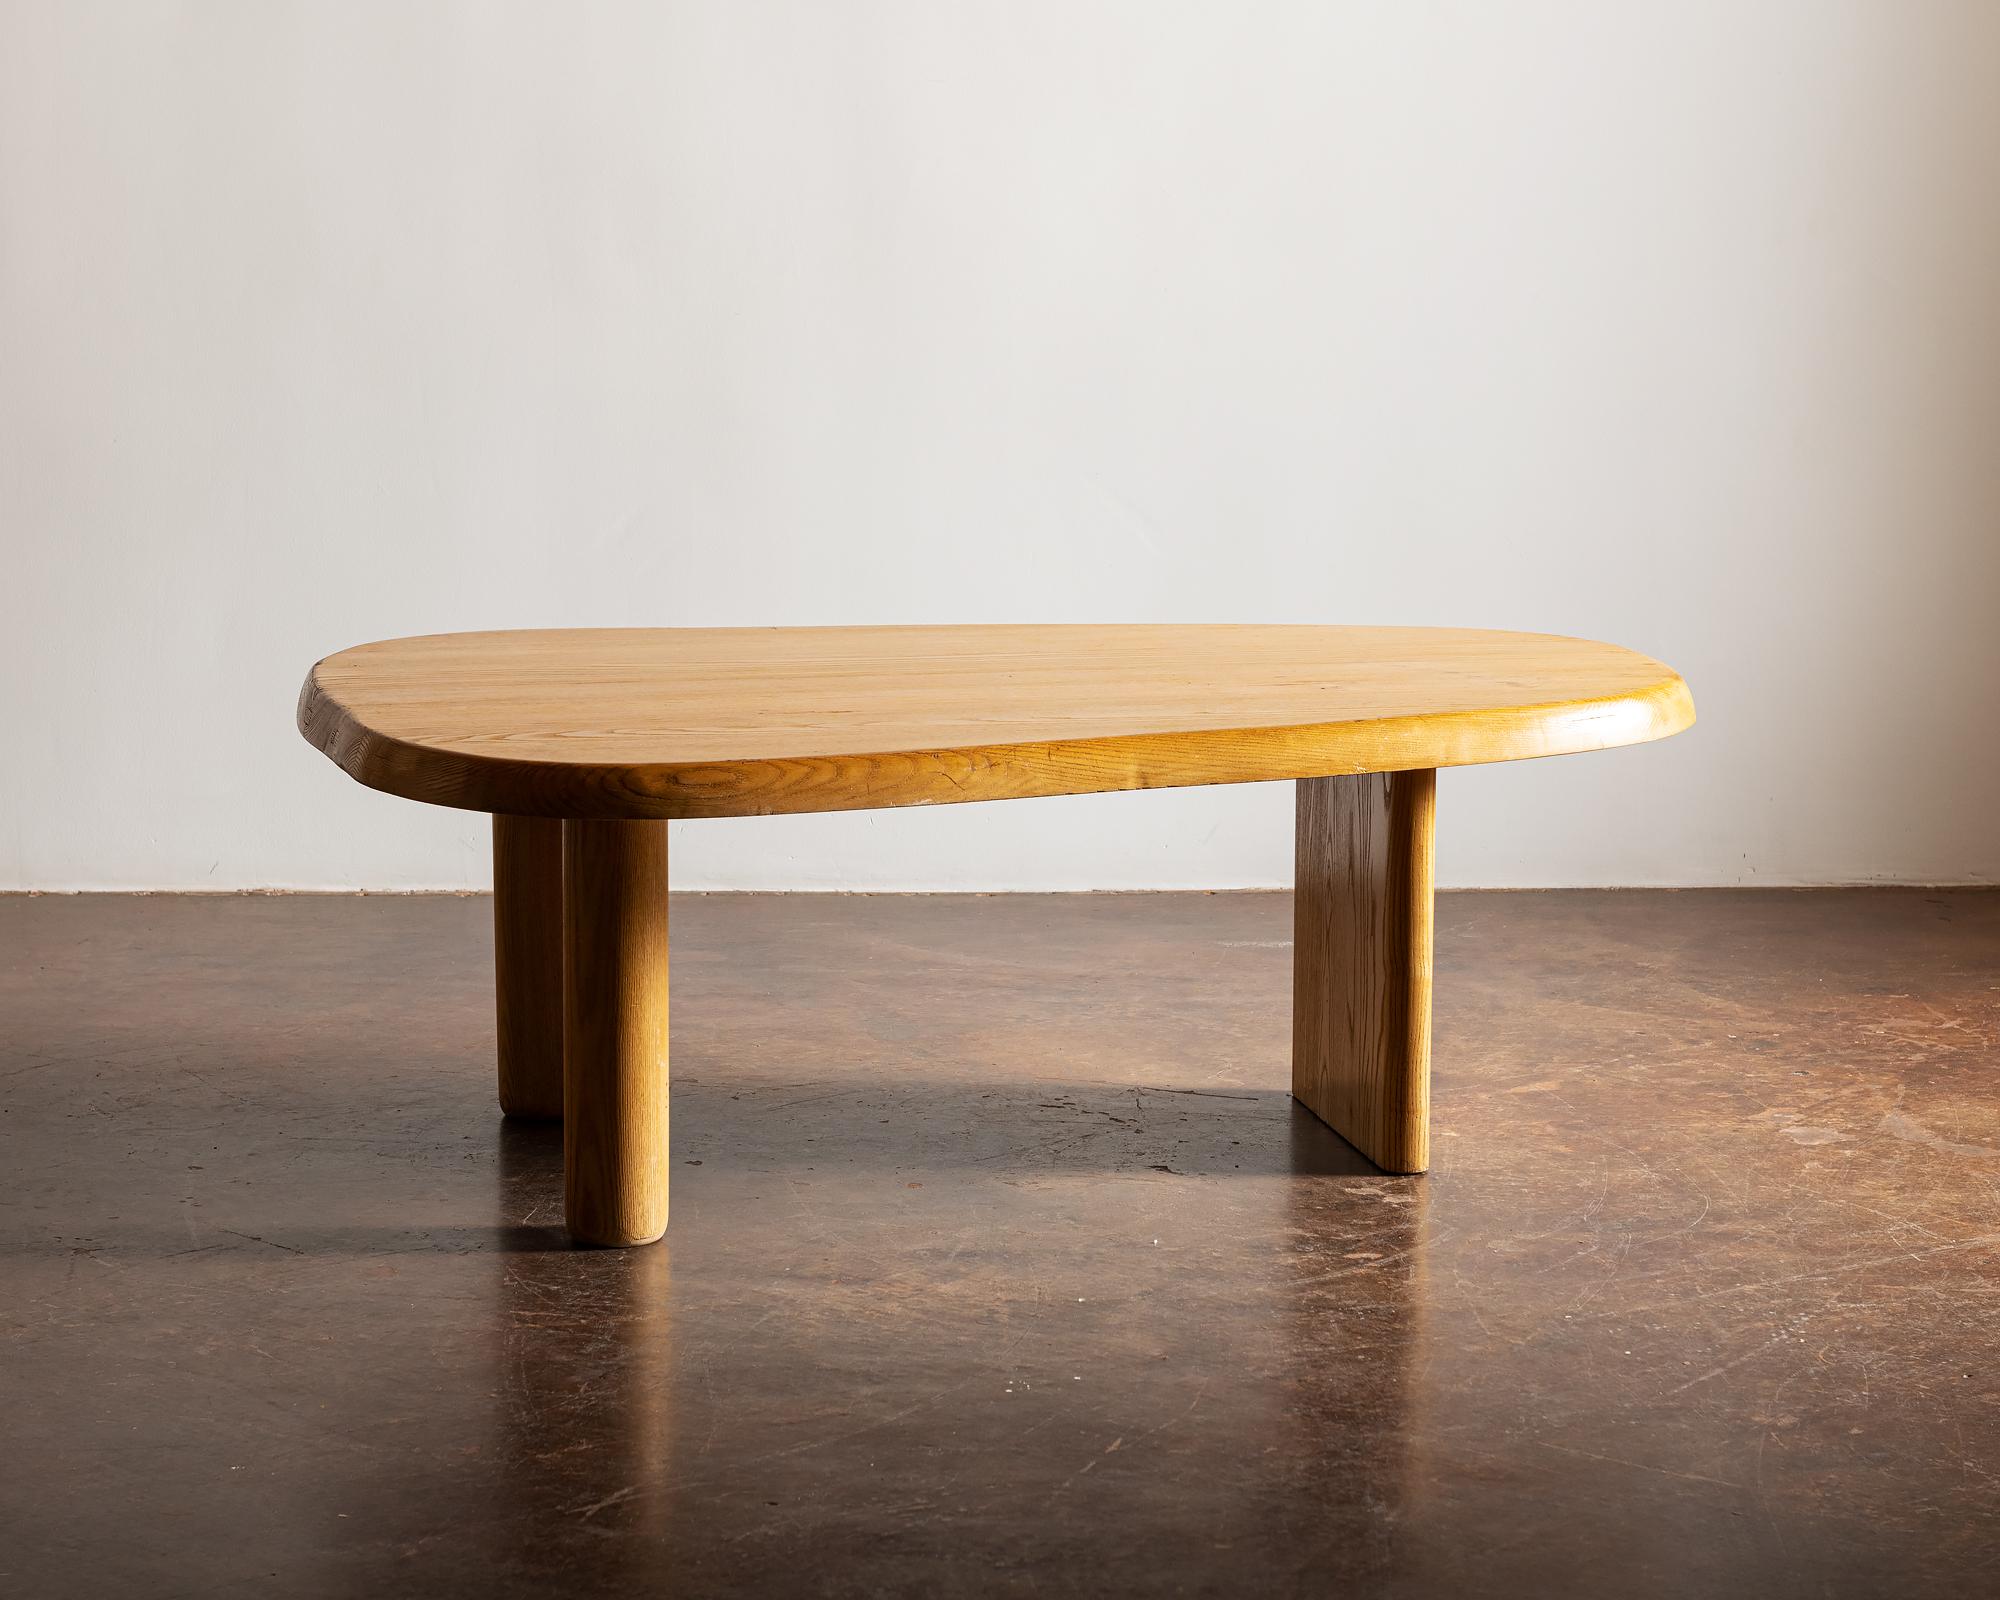 An original Forme Libre coffee table by Charlotte Perriand for Galerie Steph Simon, Paris, 1950s. This example in oak that has acquired a golden patina over the years.

 